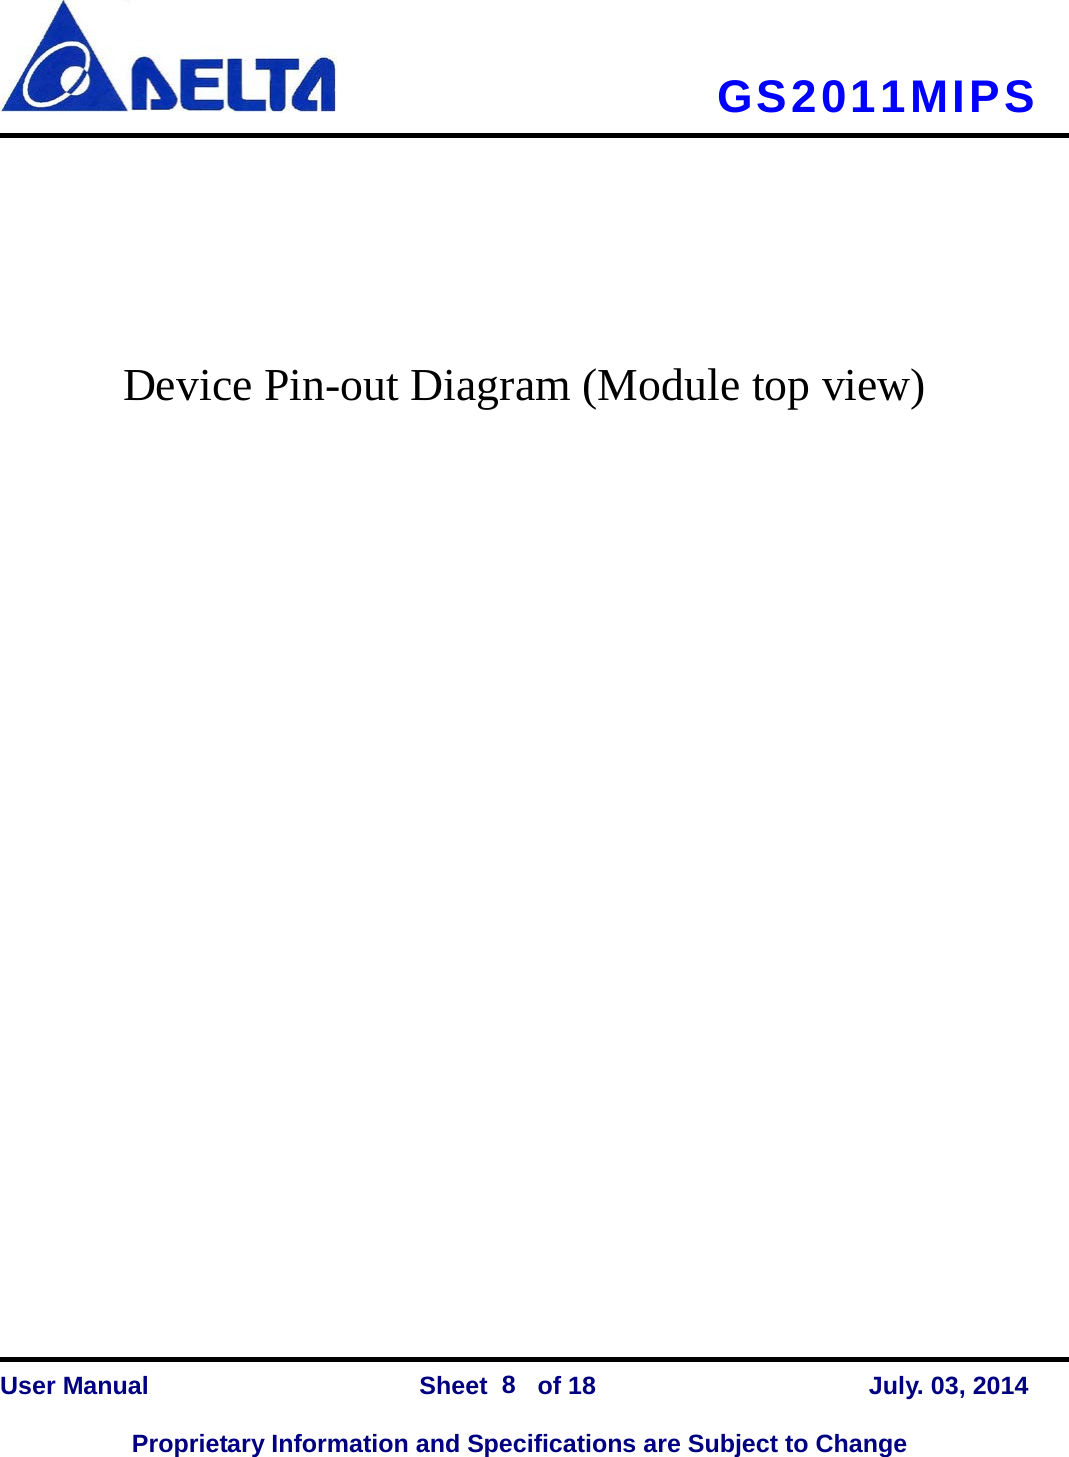     GS2011MIPS       Device Pin-out Diagram (Module top view)    User Manual                Sheet    of 18      July. 03, 2014  Proprietary Information and Specifications are Subject to Change 8 